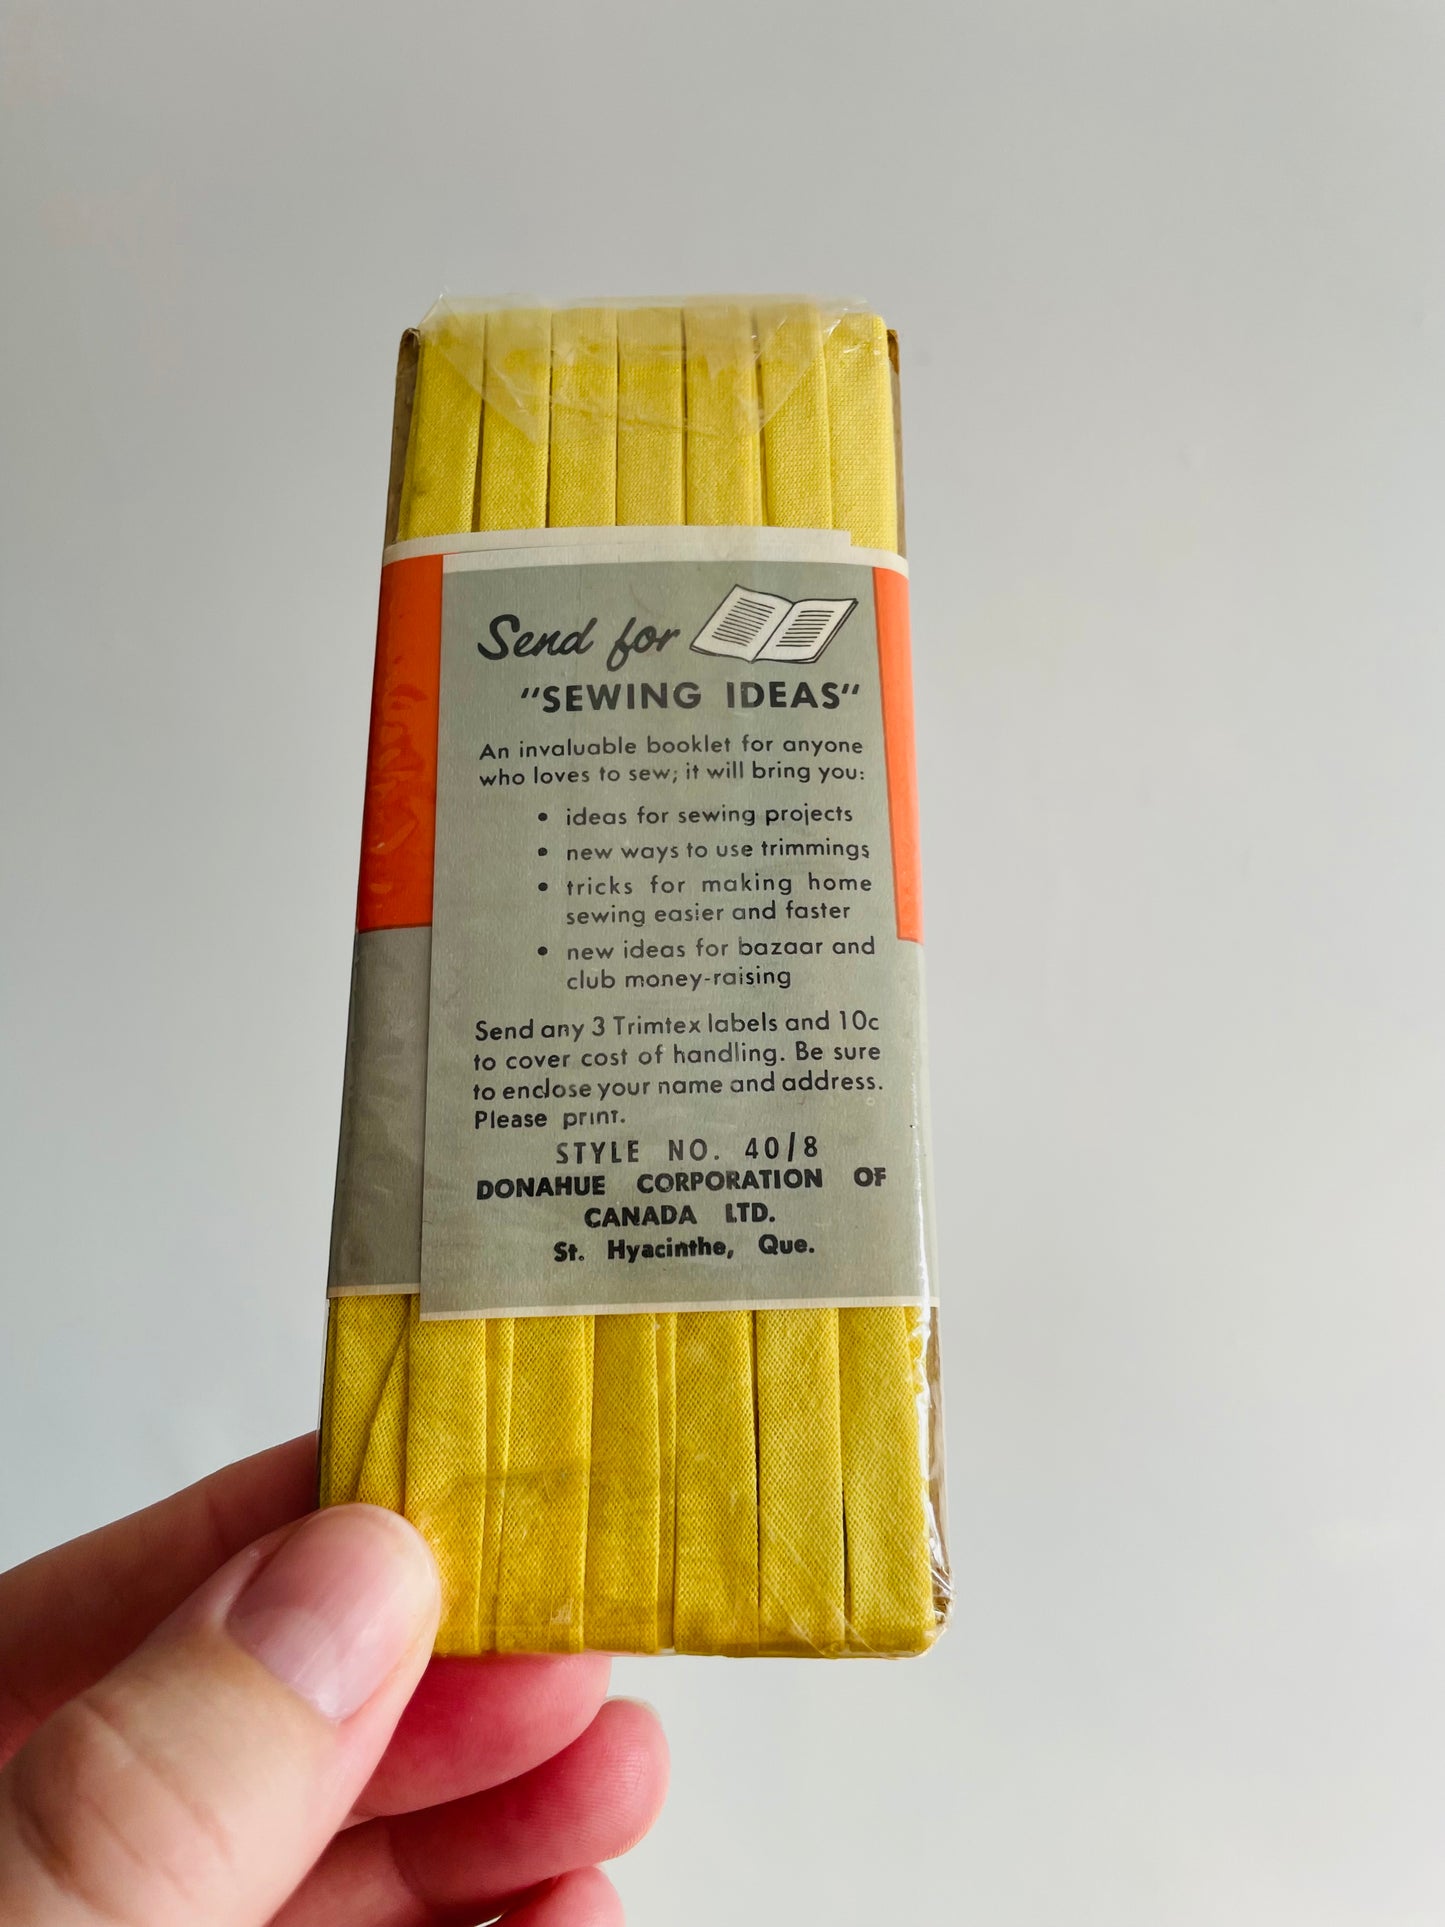 Shades of Yellow Trimtex Rick Rack & Double Fold Bias Tape - Brand New Vintage in Original Packaging - Set of 5